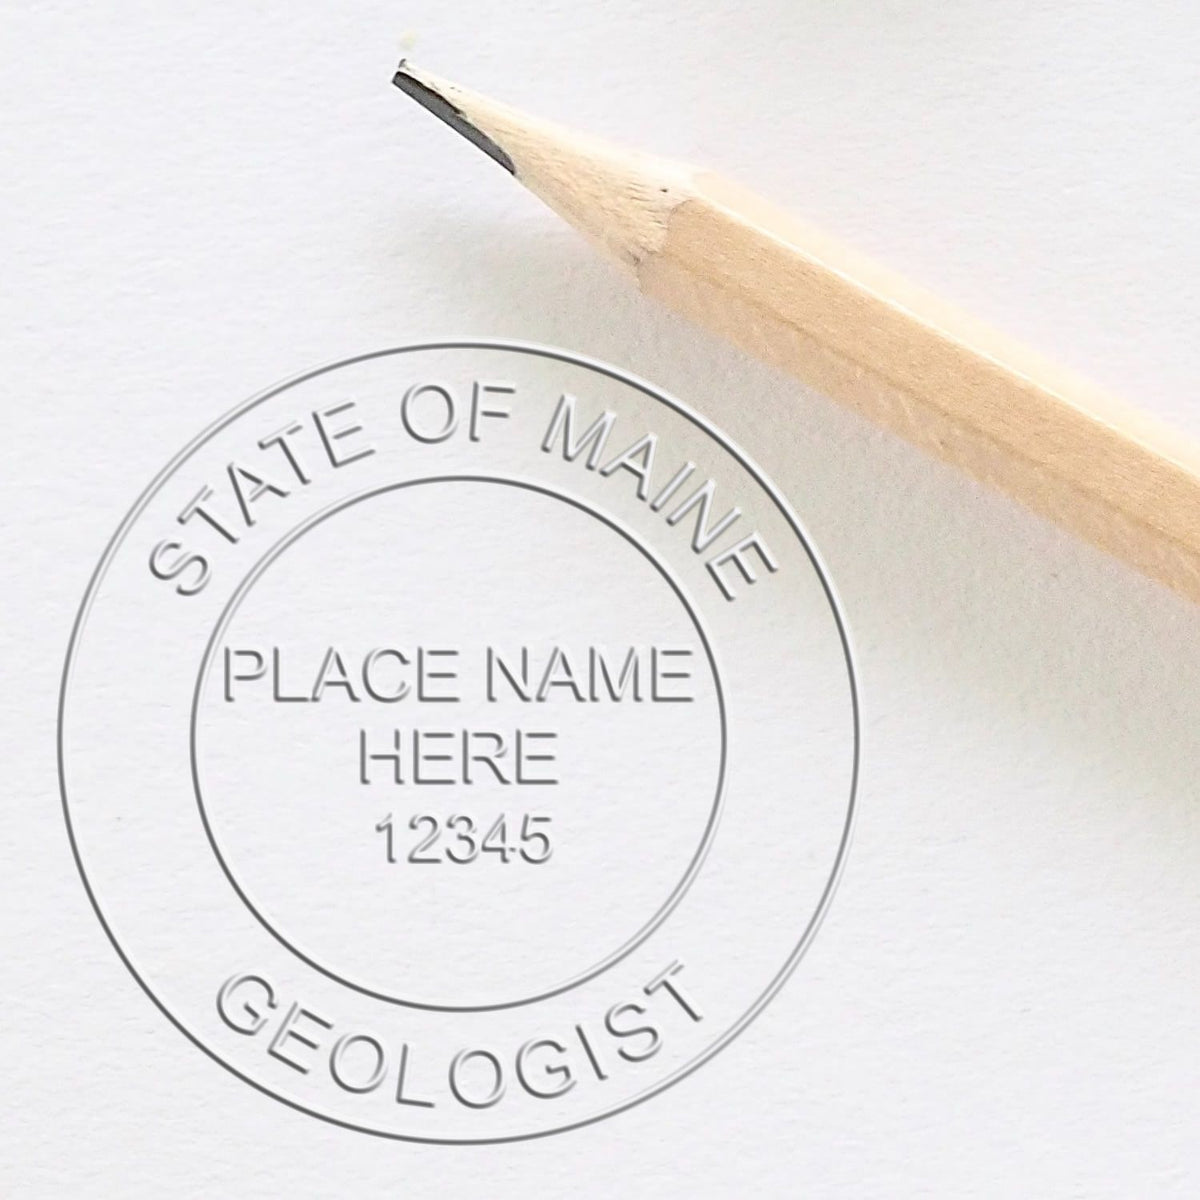 This paper is stamped with a sample imprint of the Long Reach Maine Geology Seal, signifying its quality and reliability.